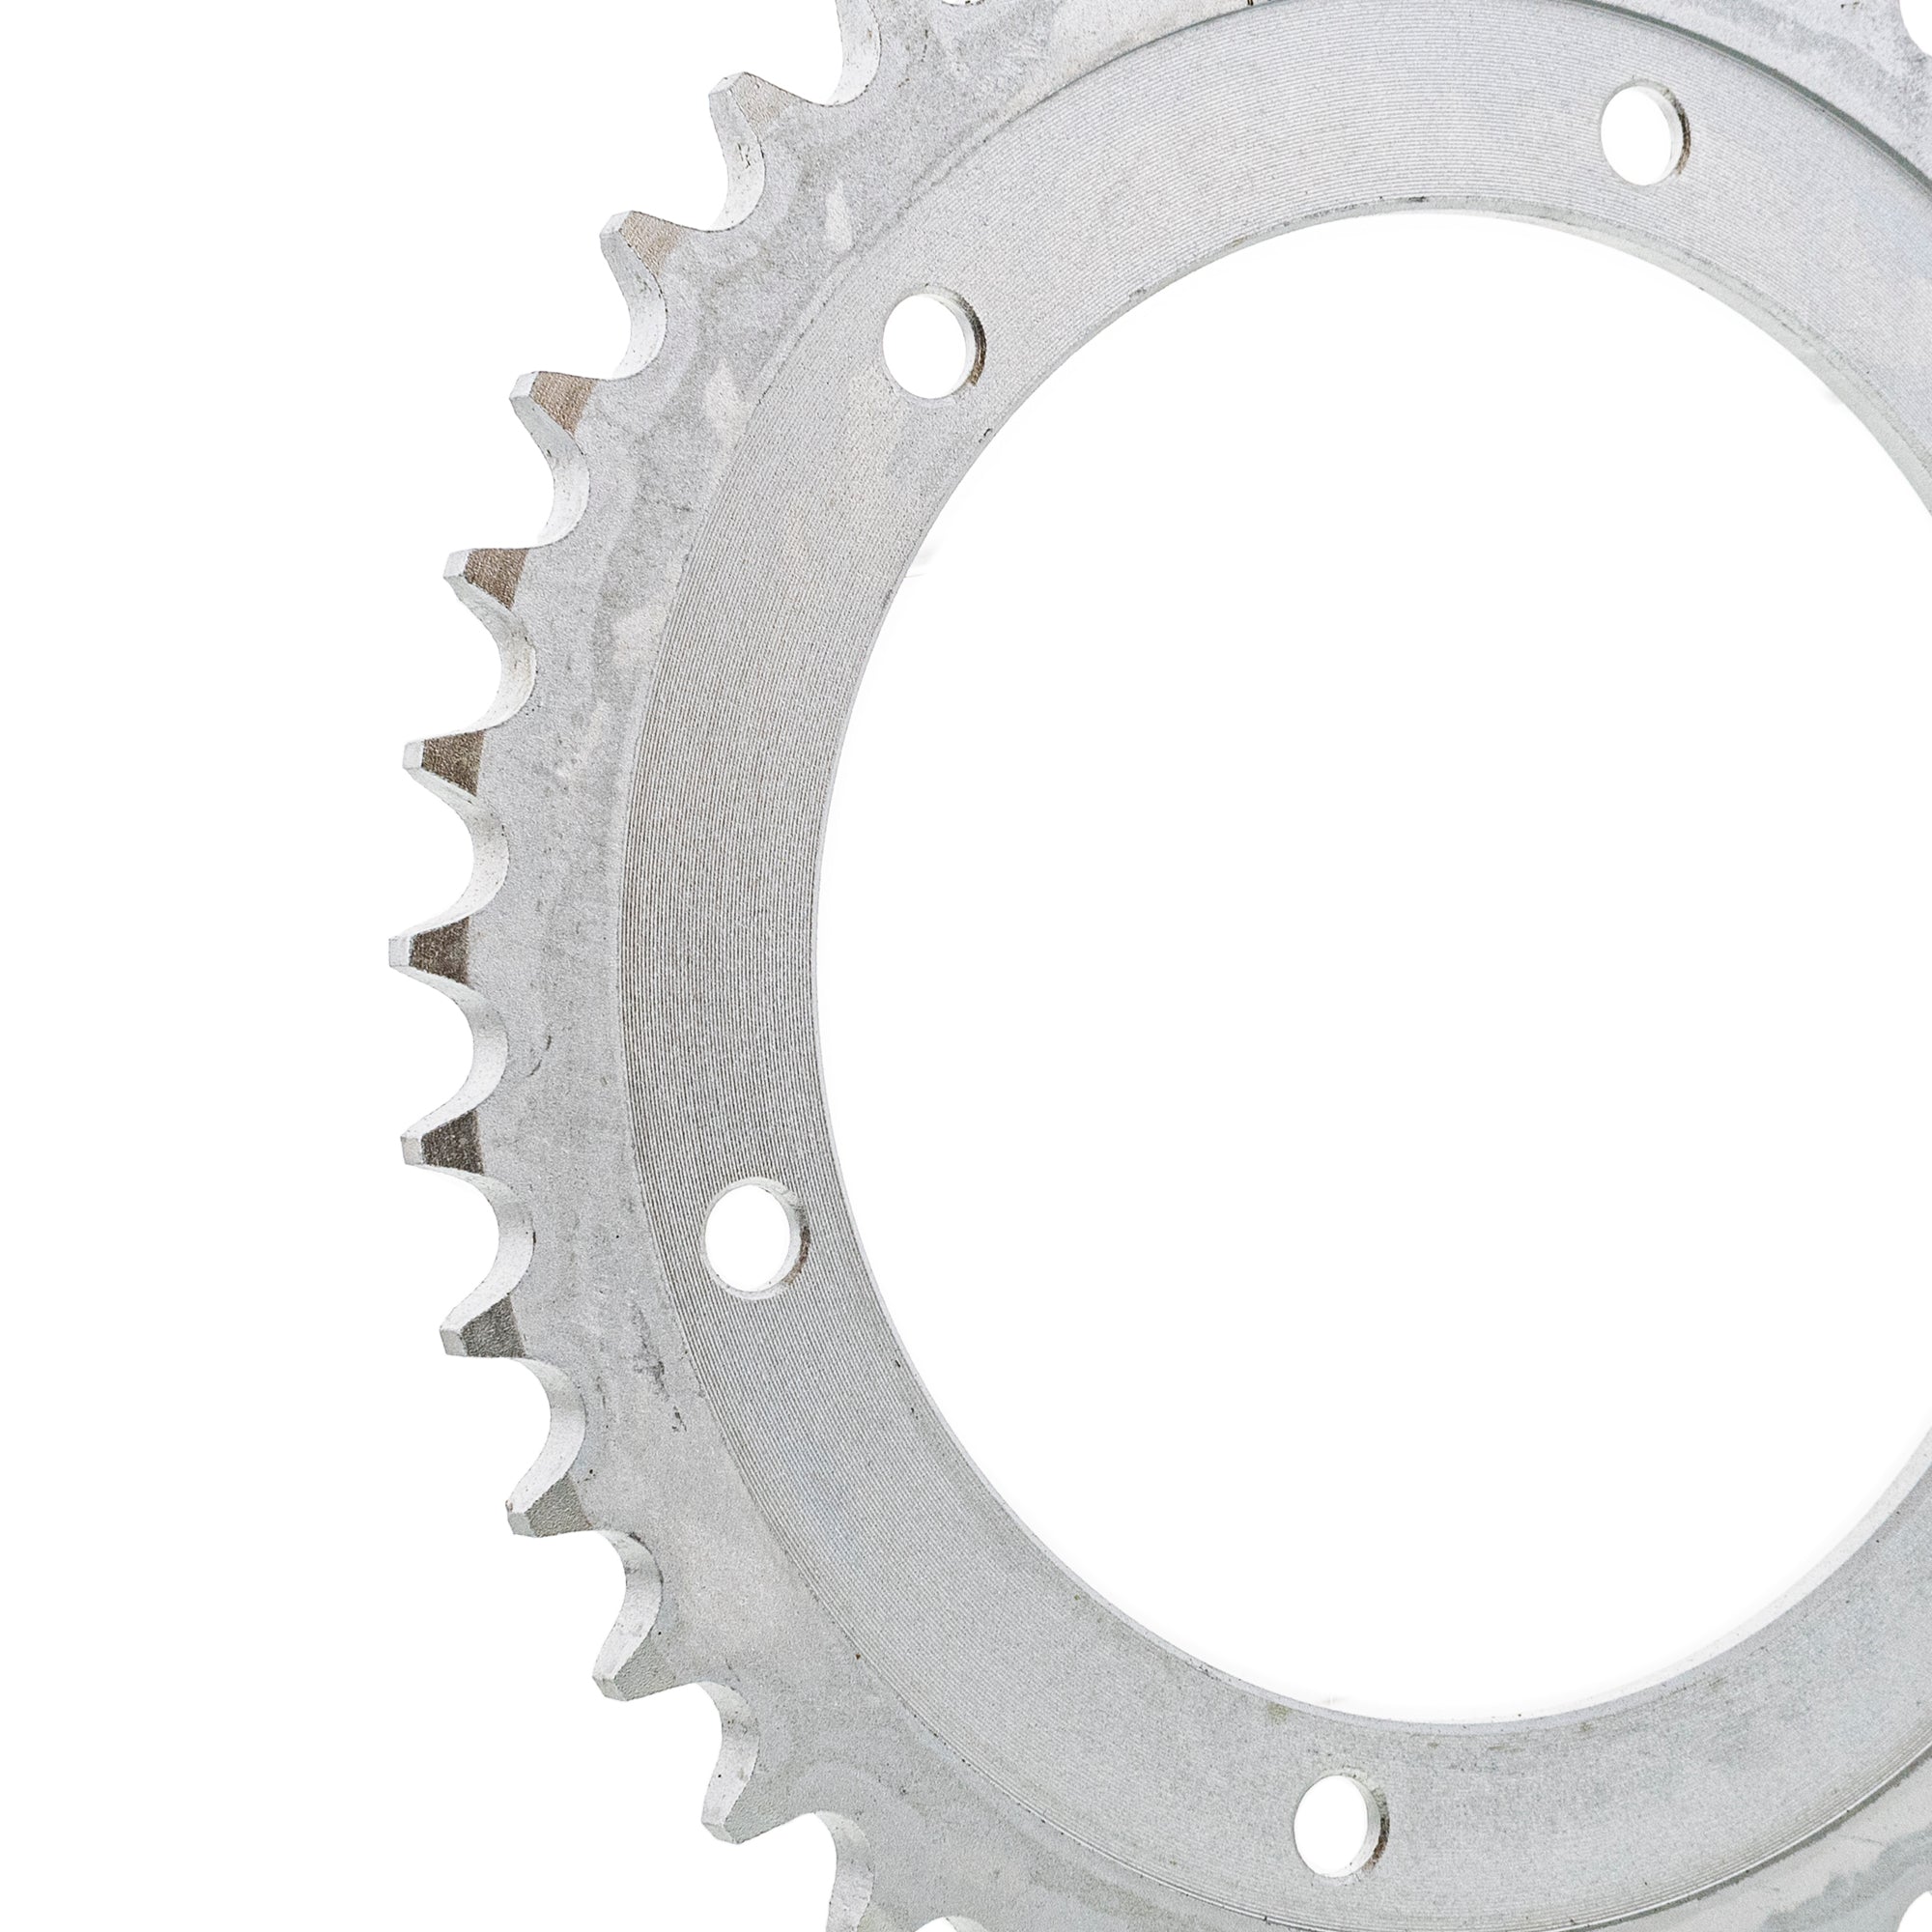 525 Pitch 41 Tooth Rear Drive Sprocket for Suzuki DR650 Motorcycle